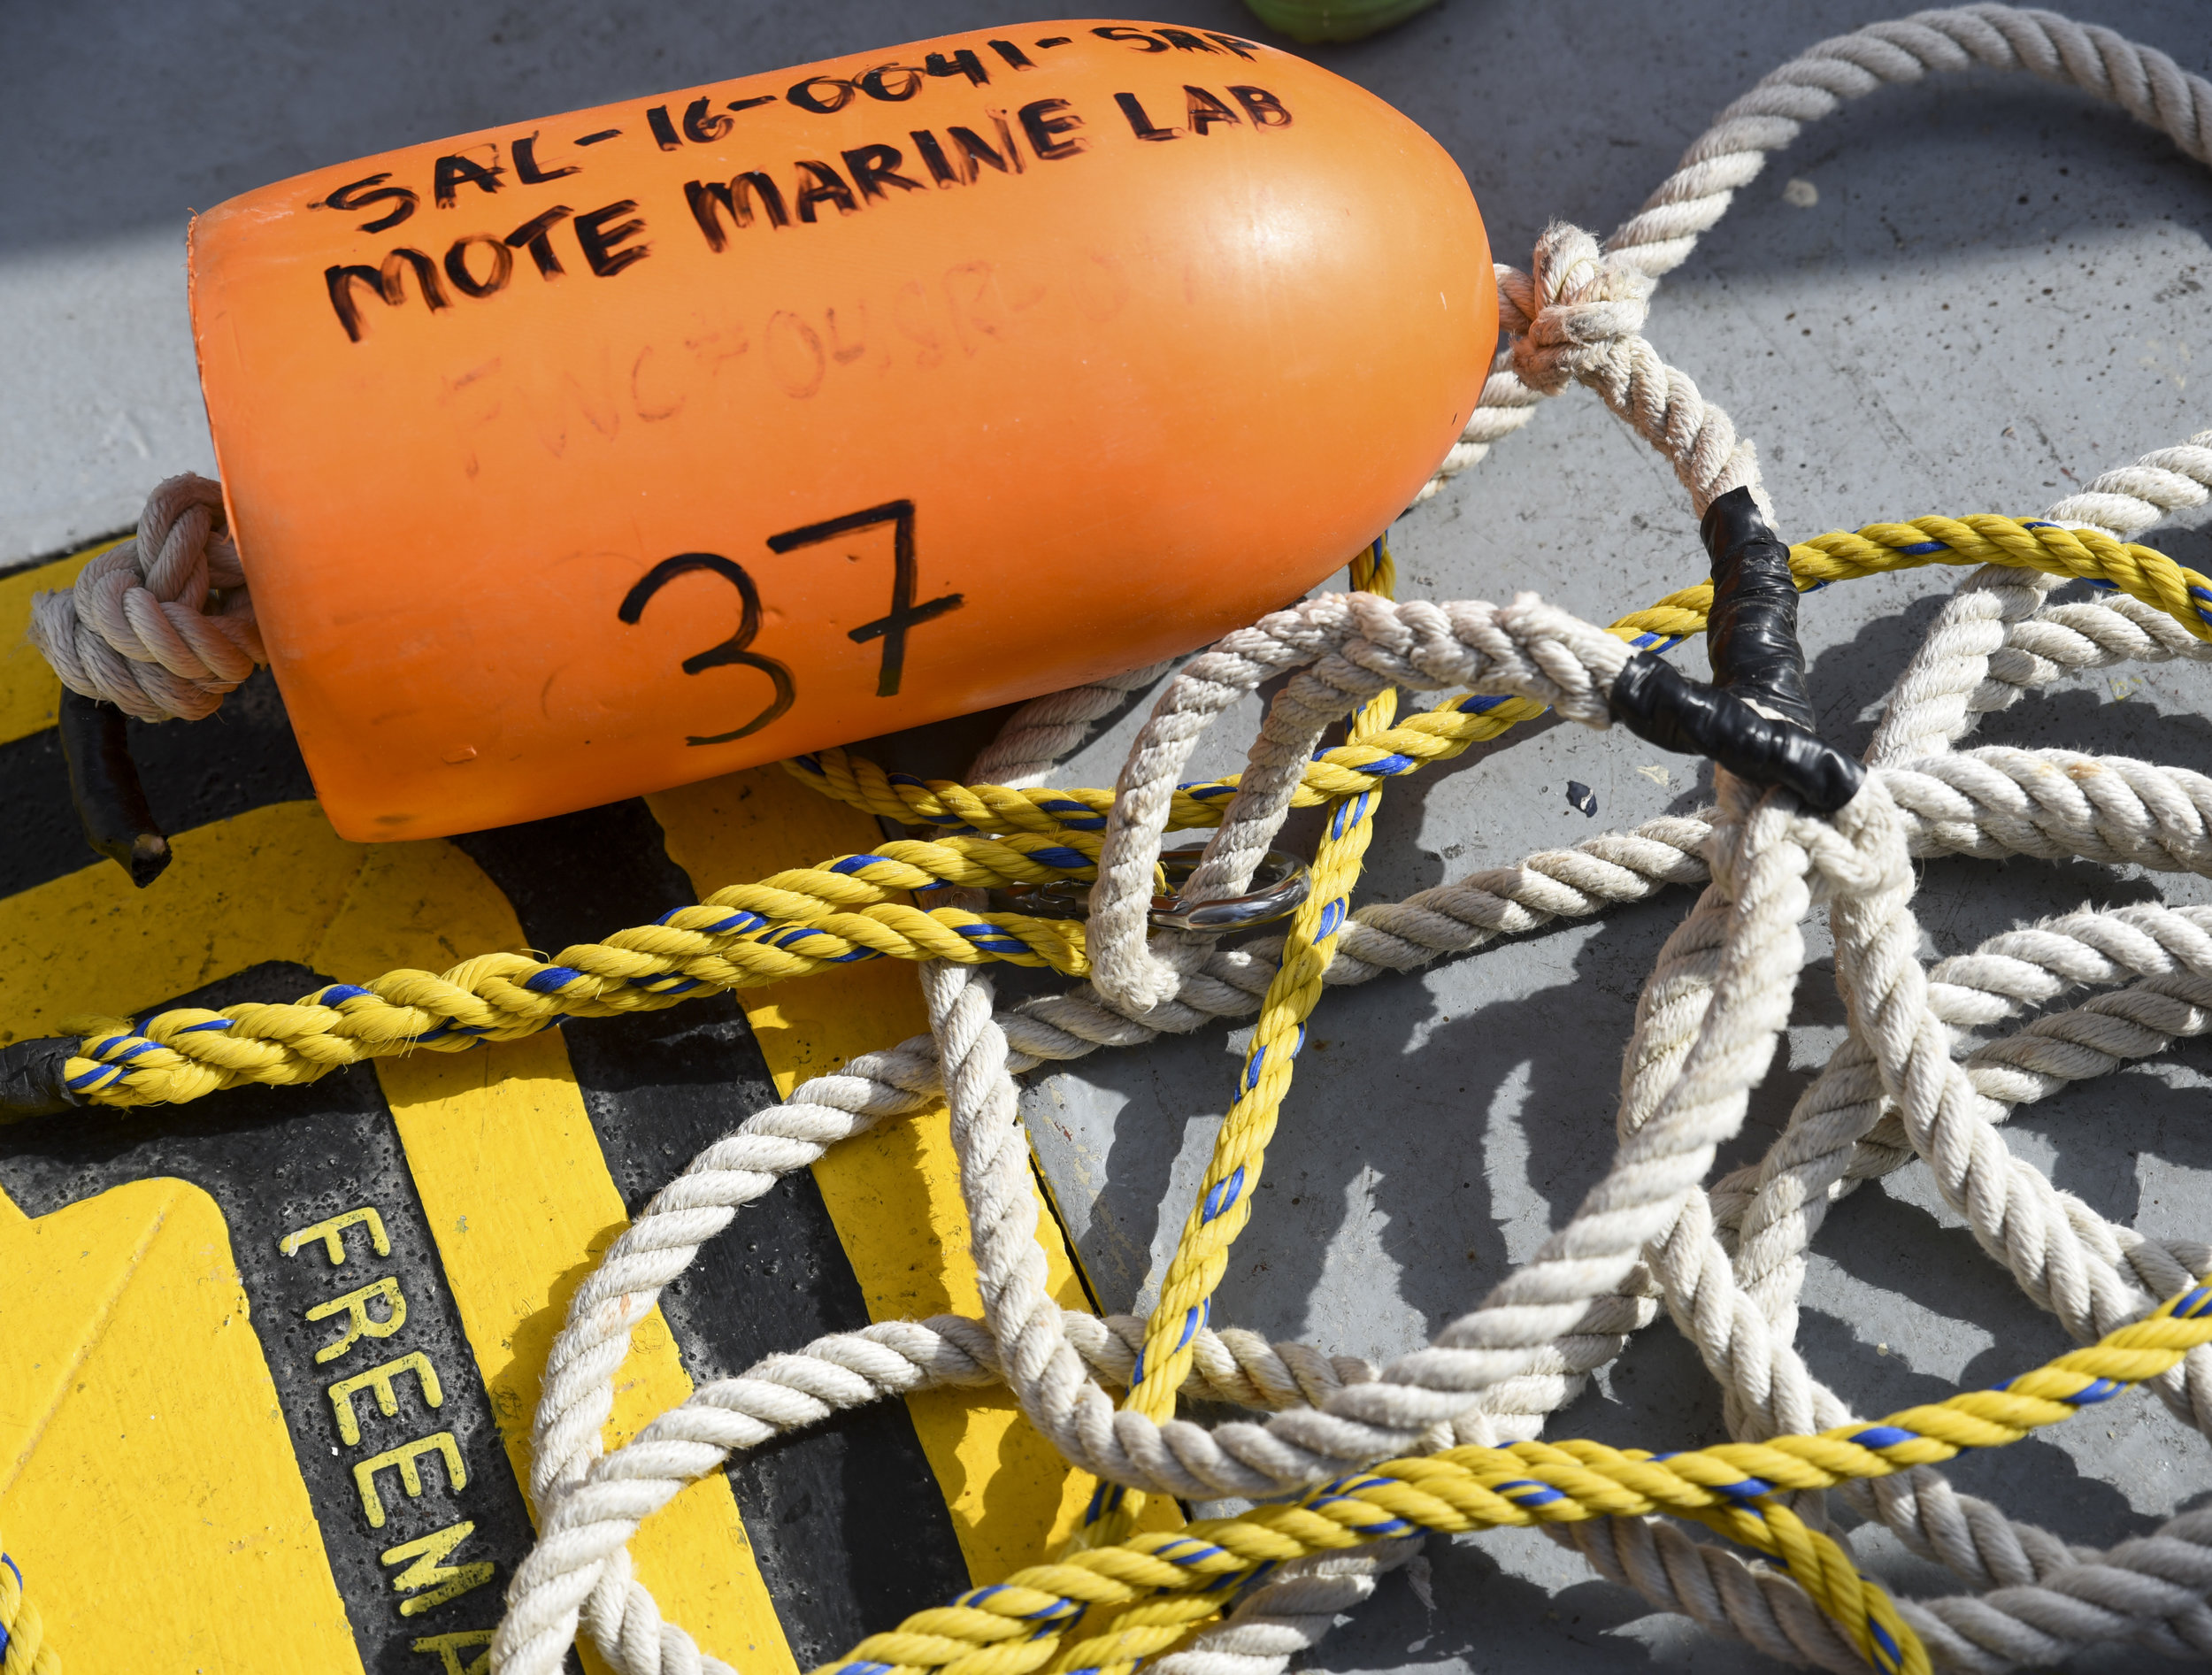  An orange floater lies on the outside deck of the R/V Bellows.&nbsp;The brightly-colored floater was attached via rope to a baited hook, which was left in the ocean in the hopes of attracting a shark. After a shark was captured, it was brought on bo